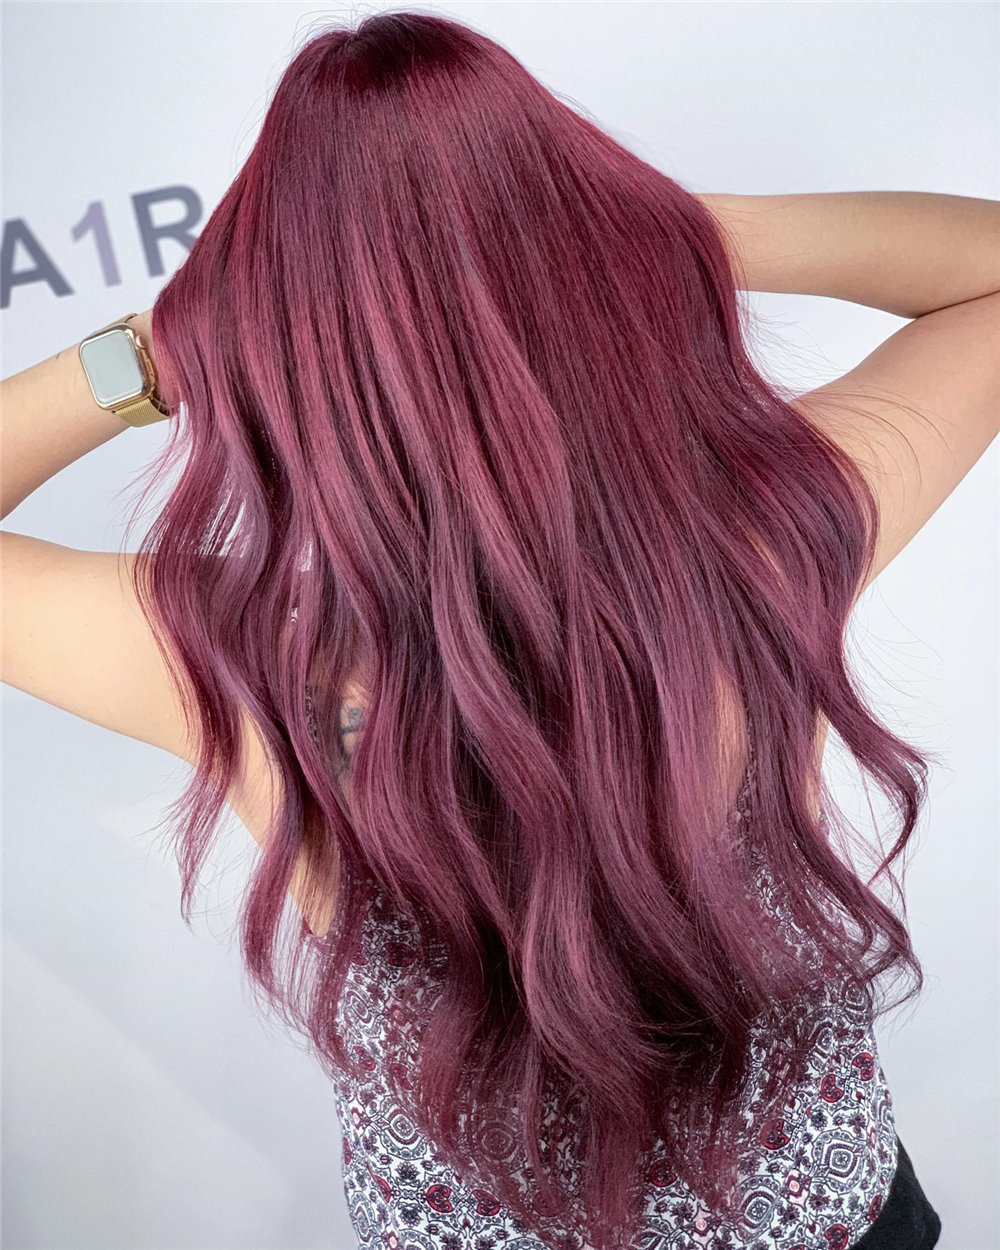 30 Burgundy Hair Color Trends 2022 for the Fall - Flymeso Blog